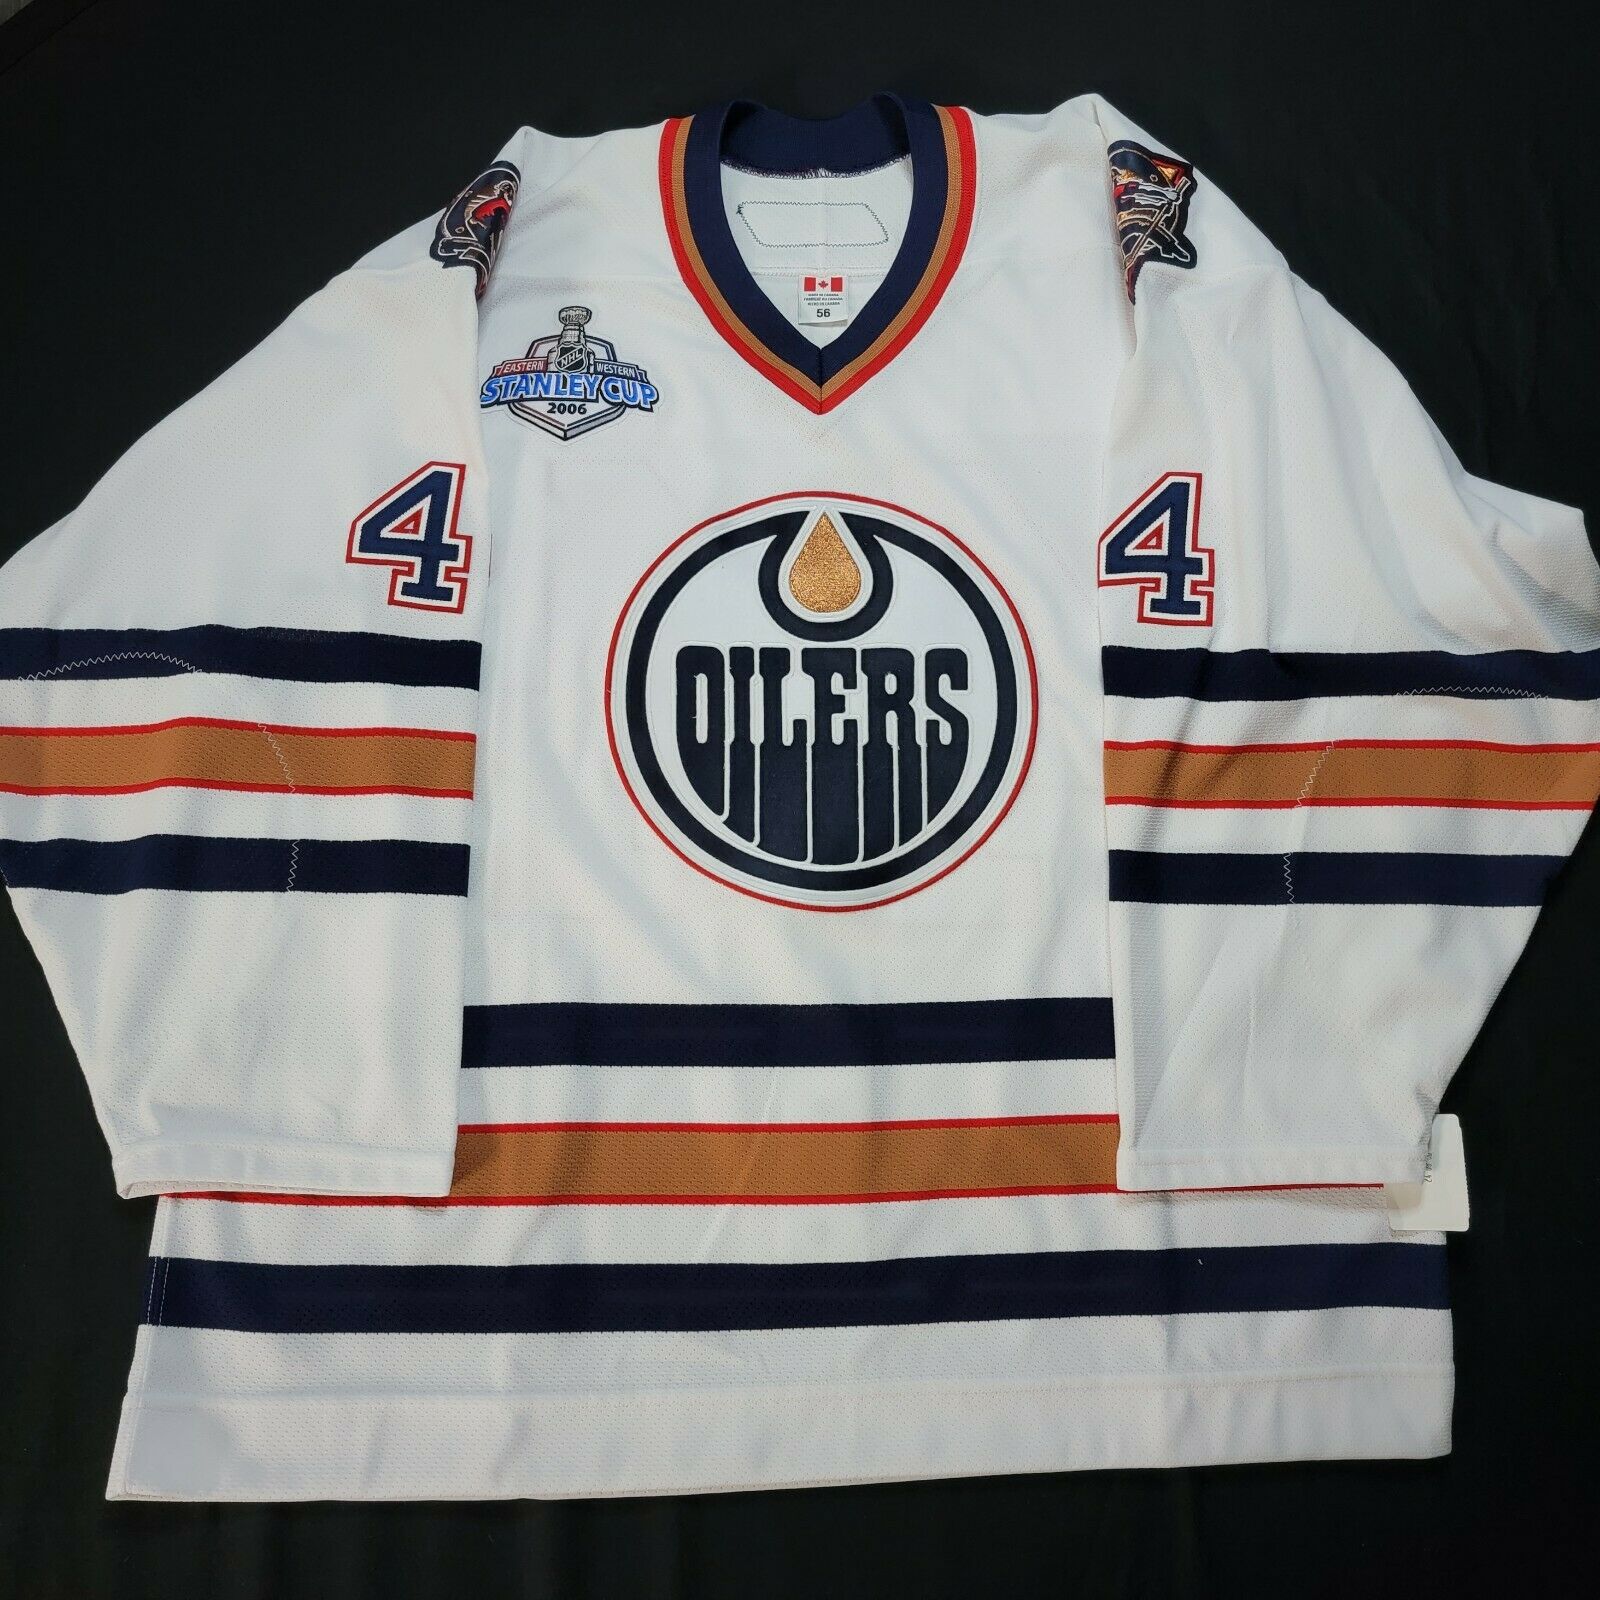 The Edmonton Oilers jersey release… for real this time. - OilersNation